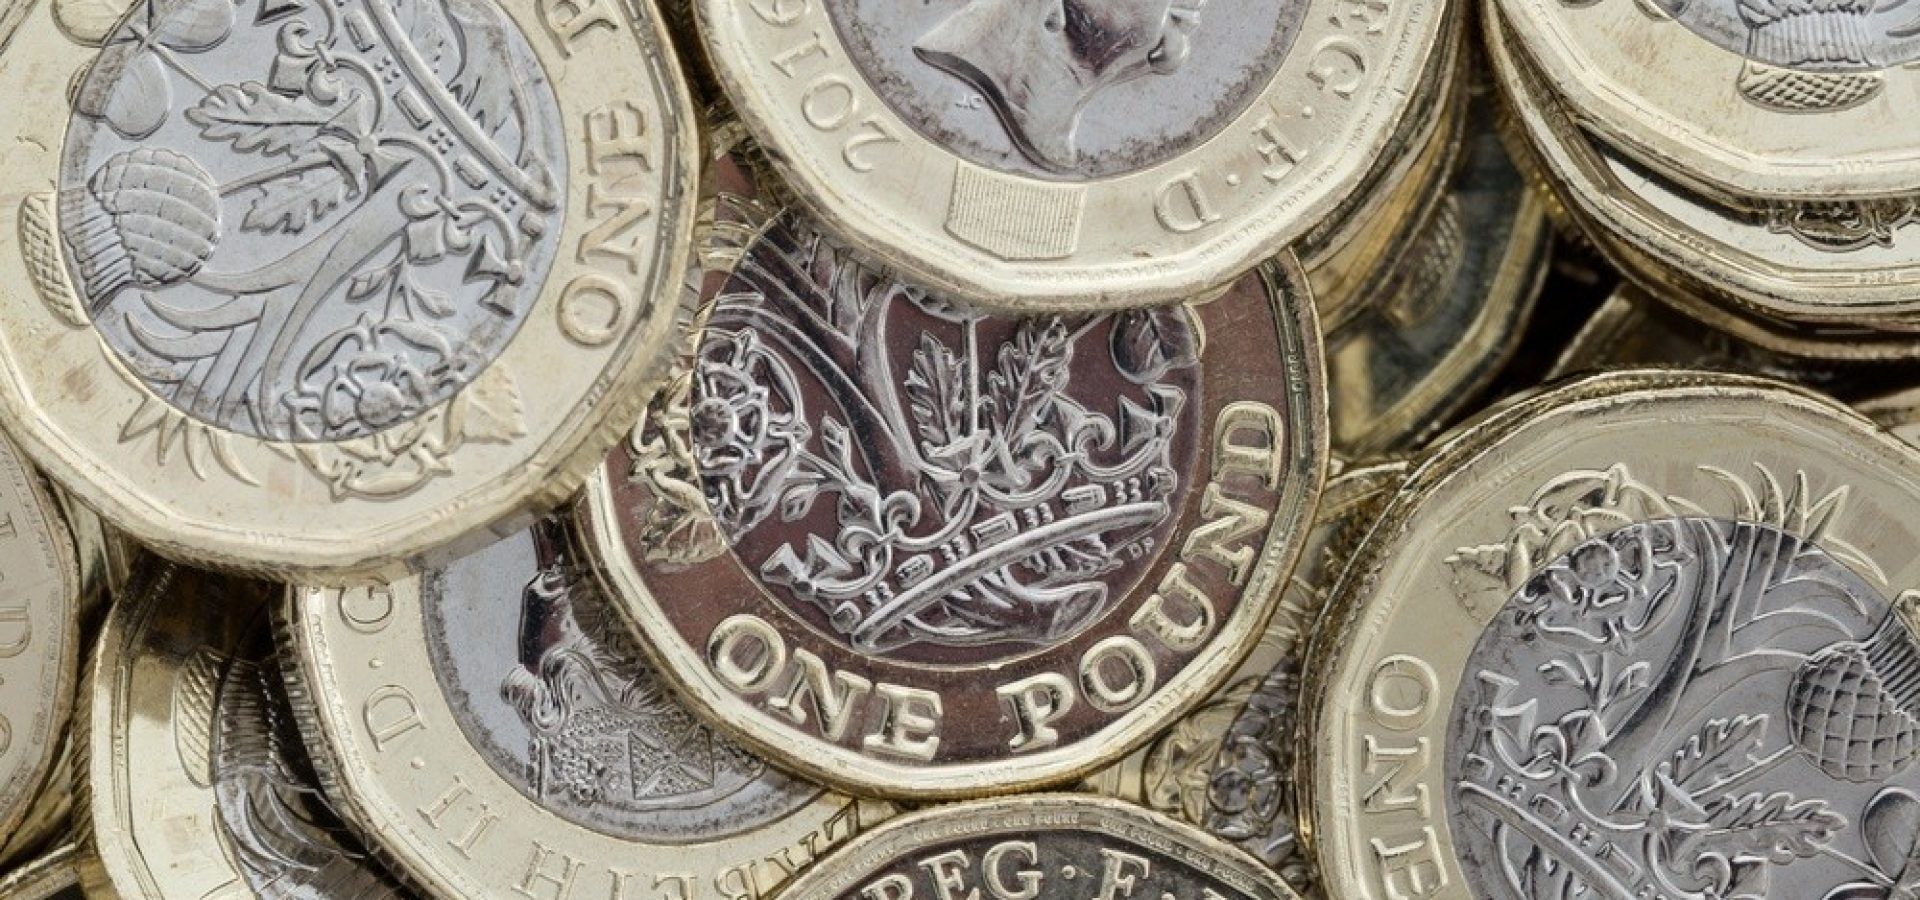 Wibest – GBPUSD: A close up shot of pound sterling coins